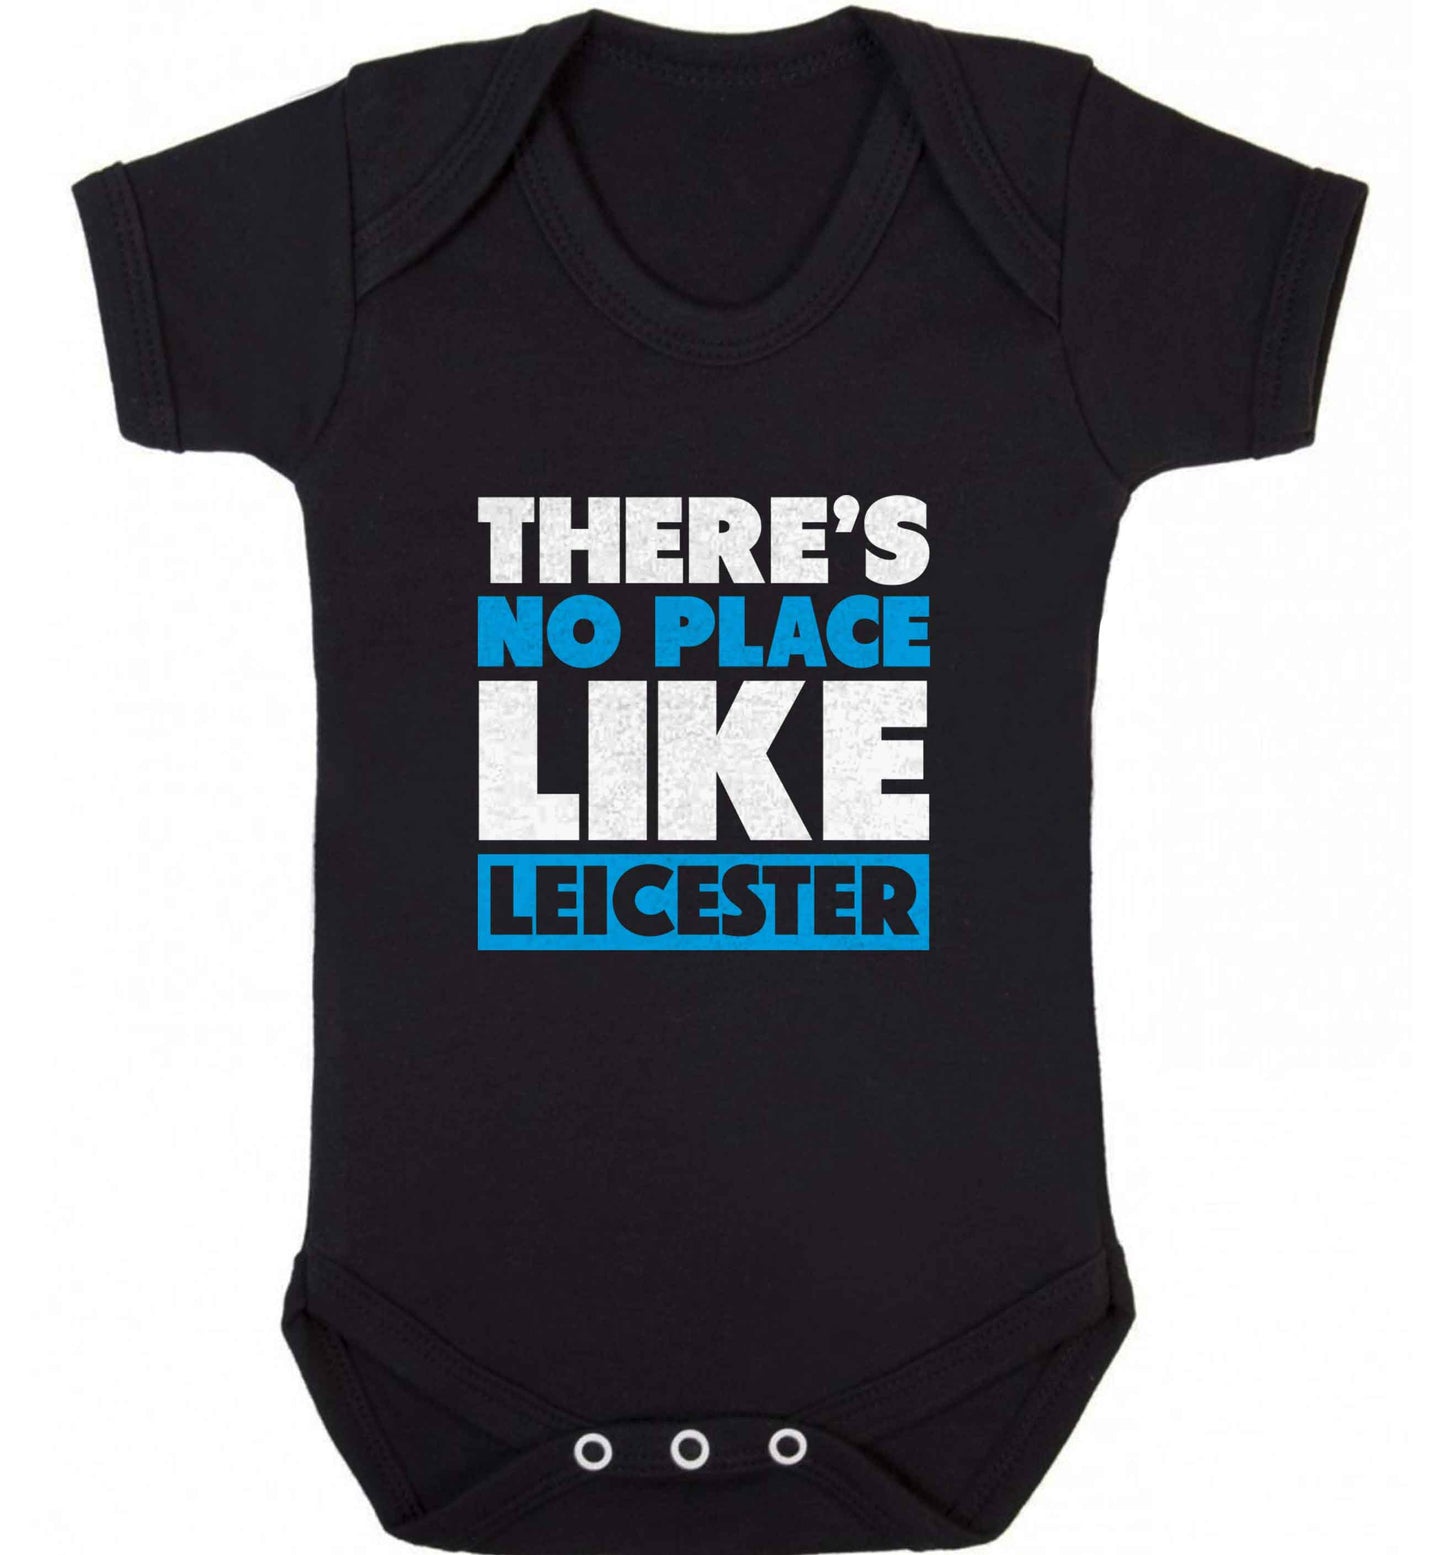 There's no place like Leicester baby vest black 18-24 months